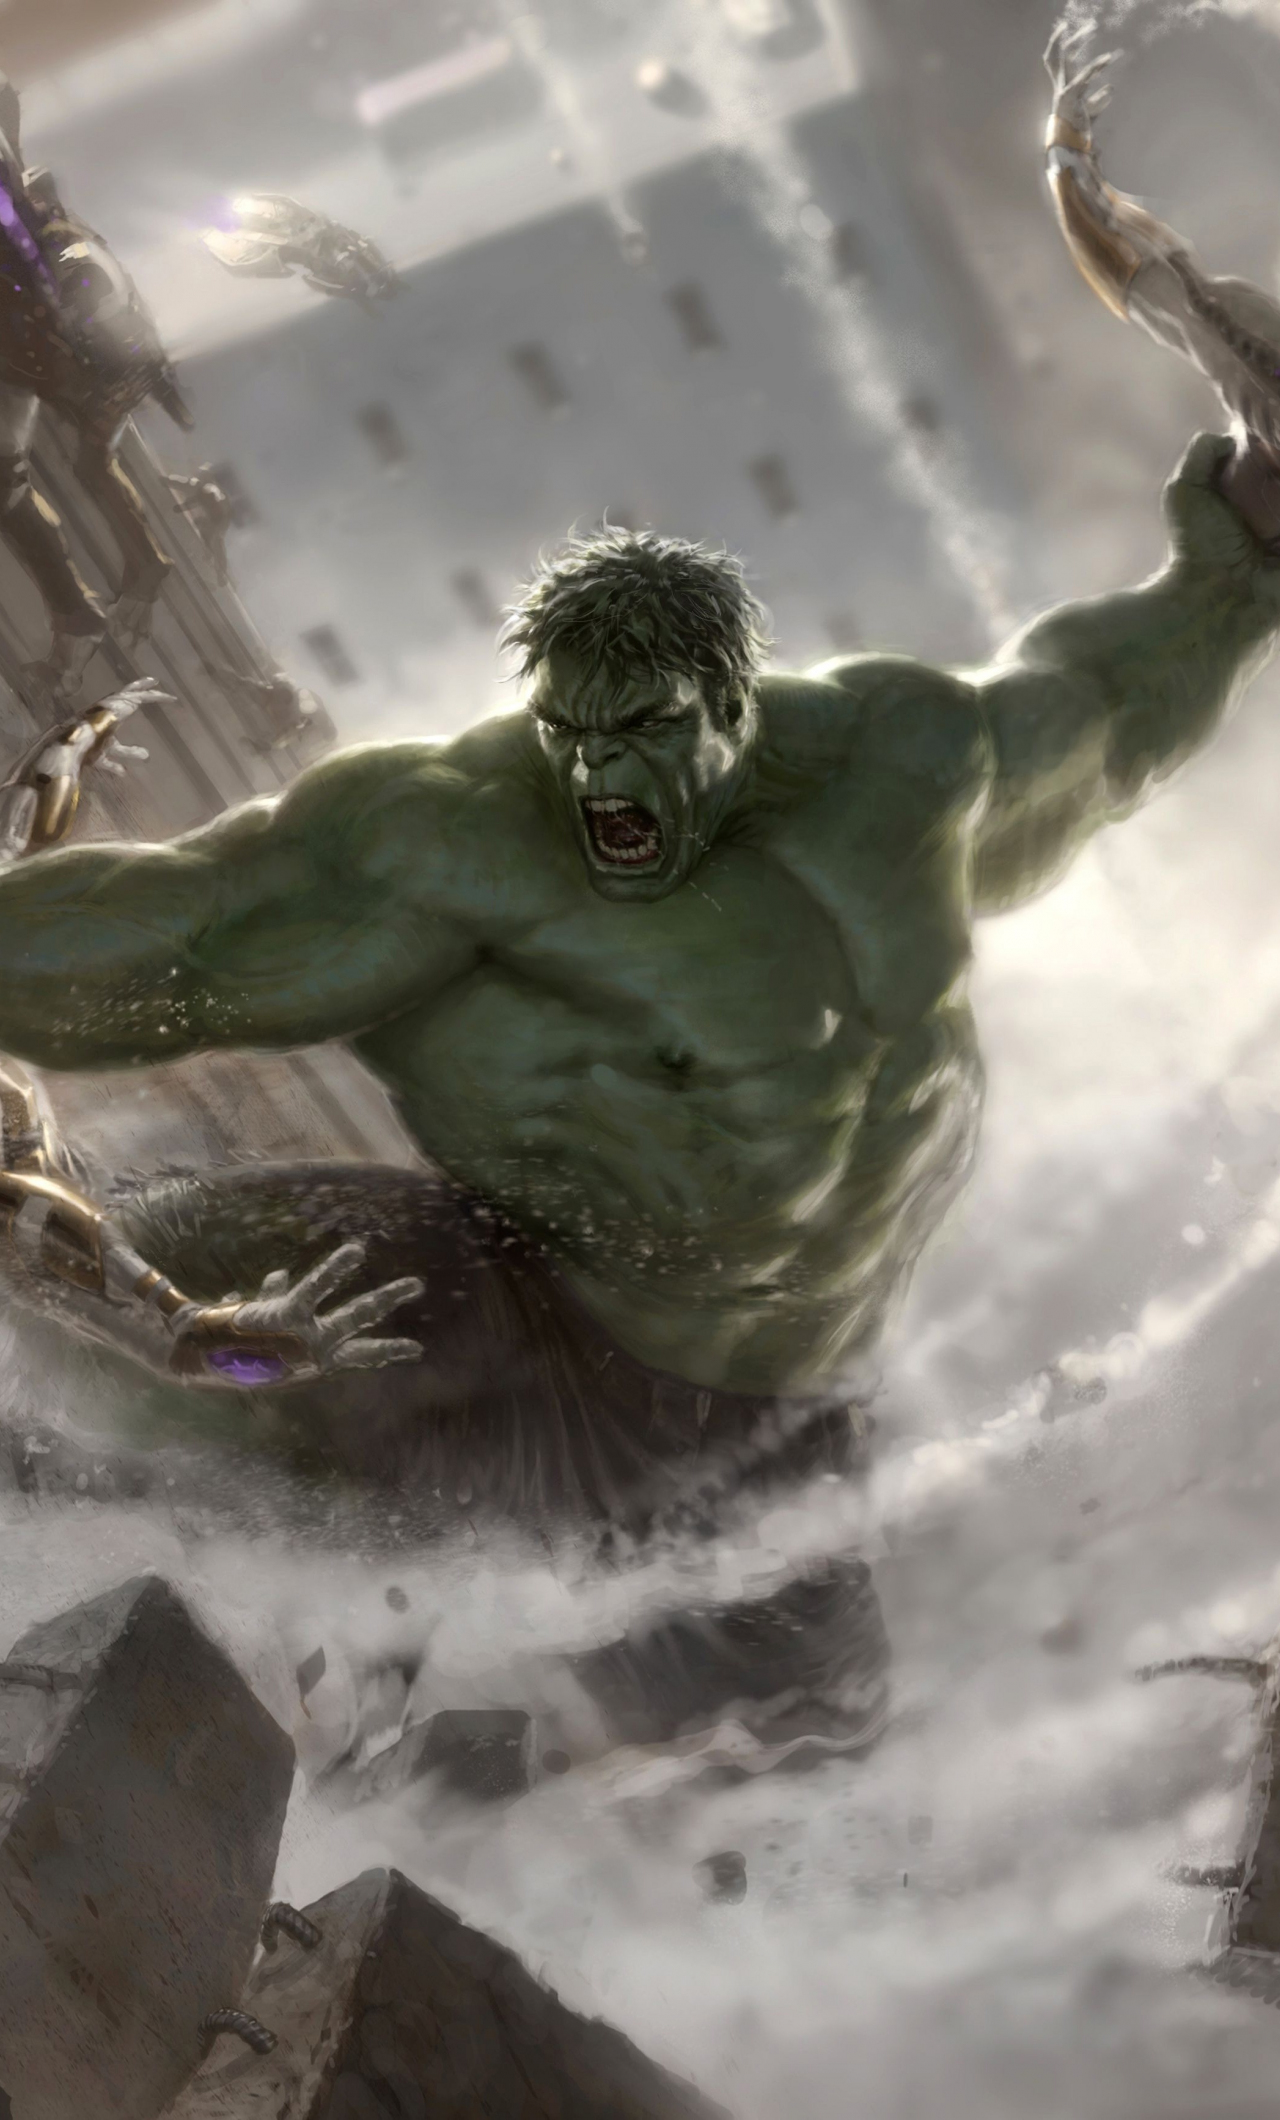 Download wallpaper 1280x2120 angry hulk and robots, avengers: age of  ultron, art, iphone 6 plus, 1280x2120 hd background, 15865